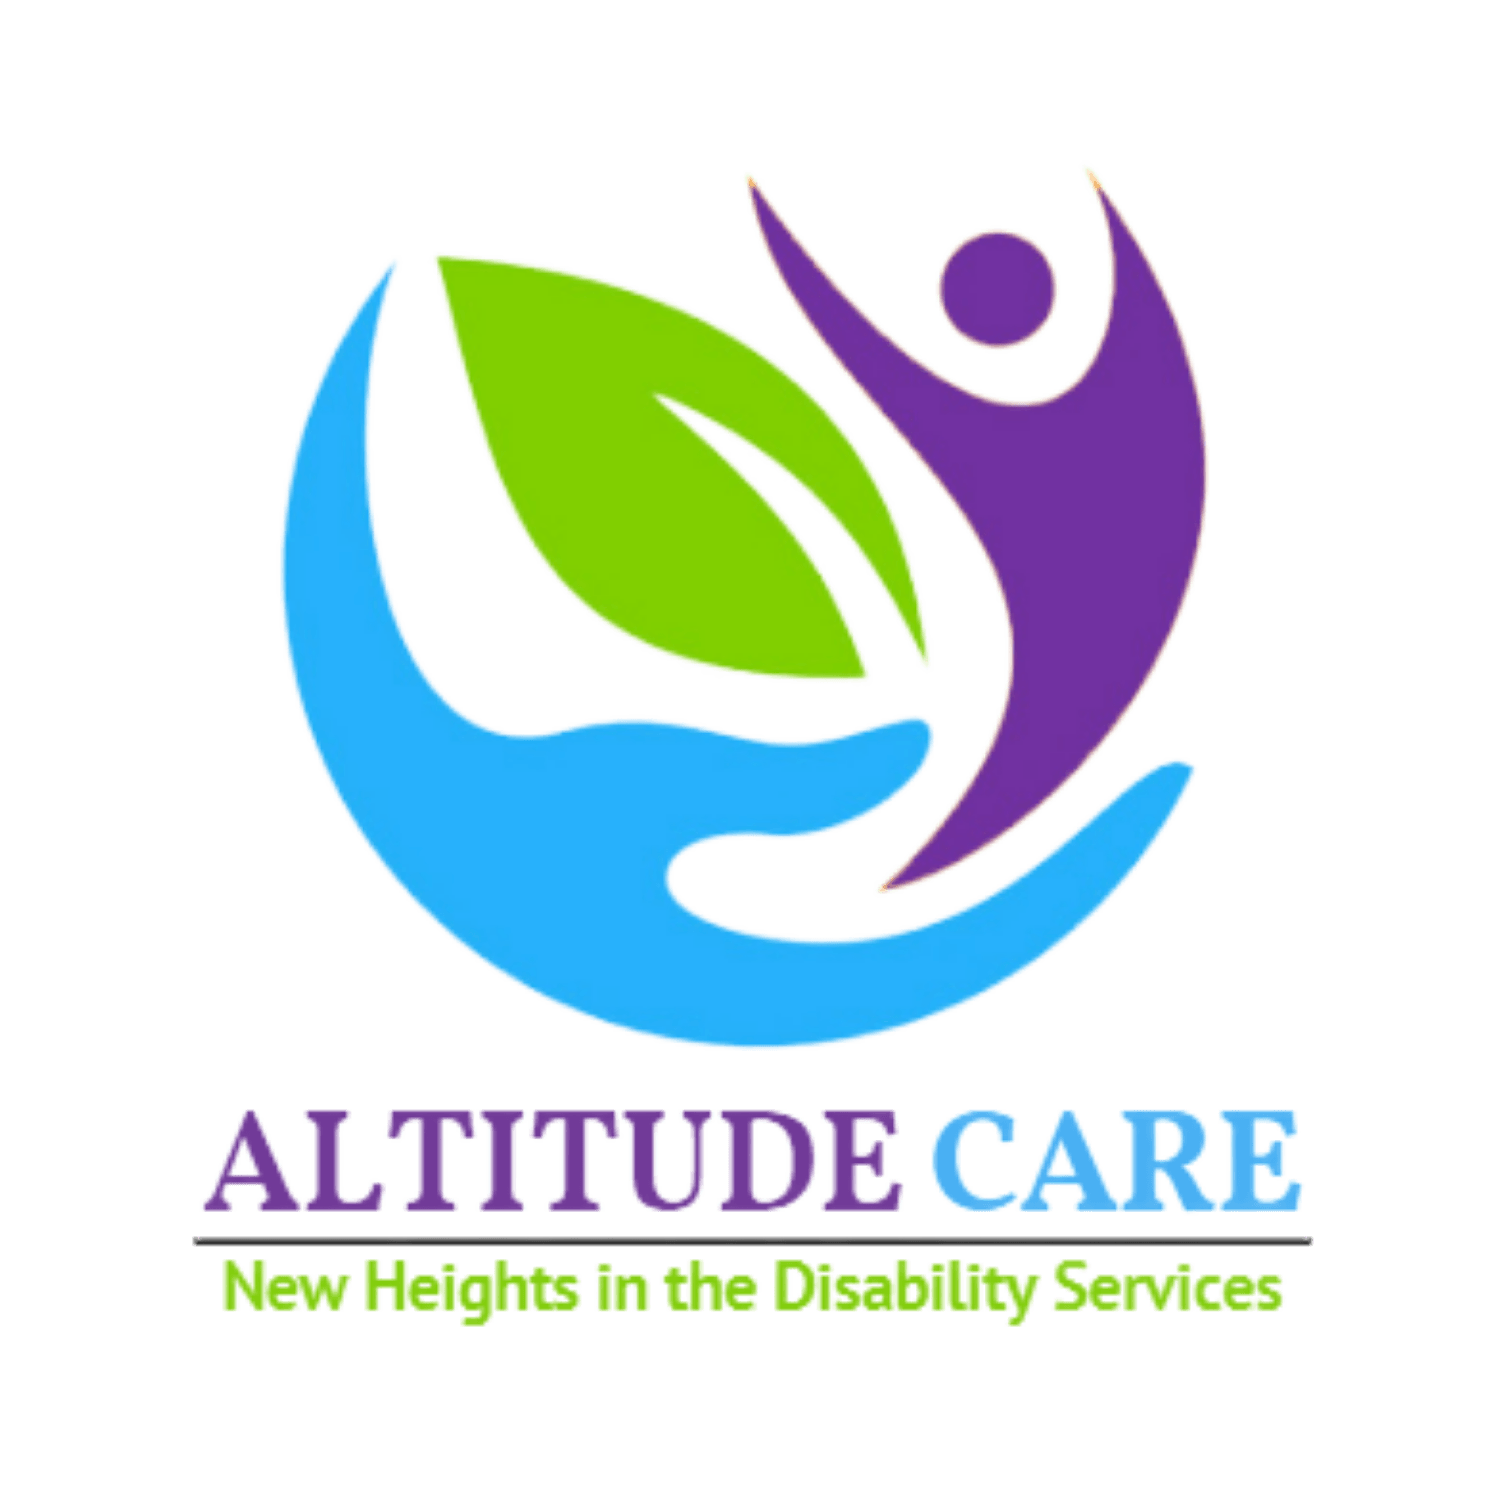 Altitude Care | NDIS Disability Care in Perth - We are registered with Australian government regulators